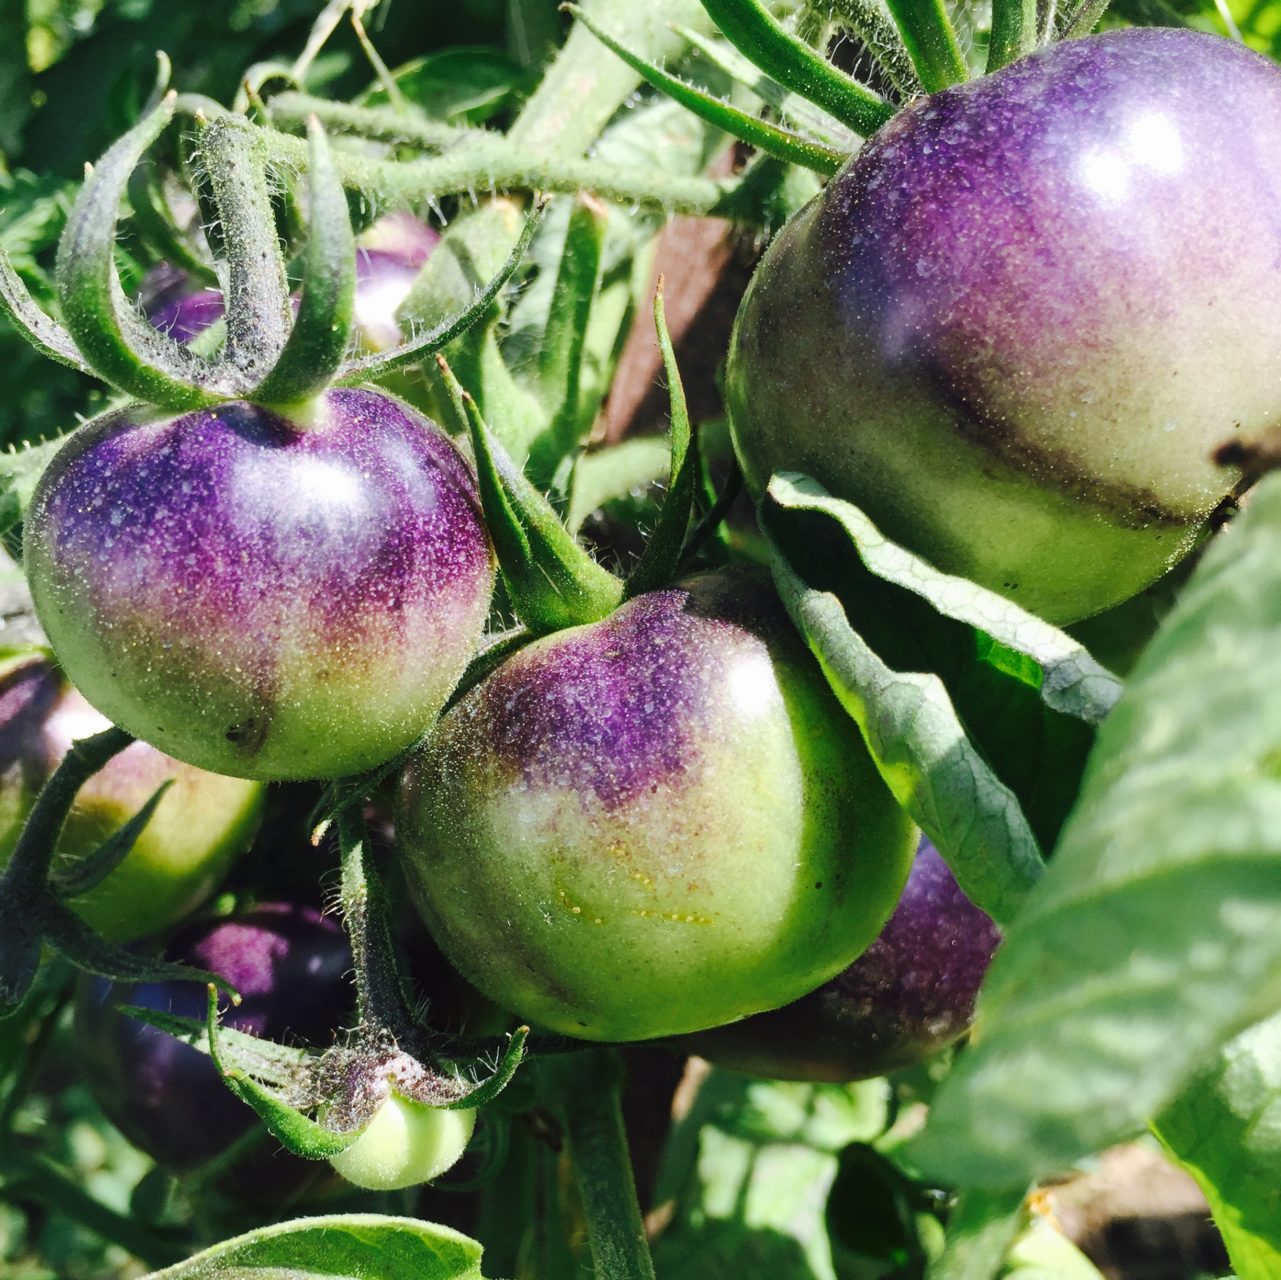 Chateau Bourdaisiere has the fantastic tomato collection - this one is Blue Streaks